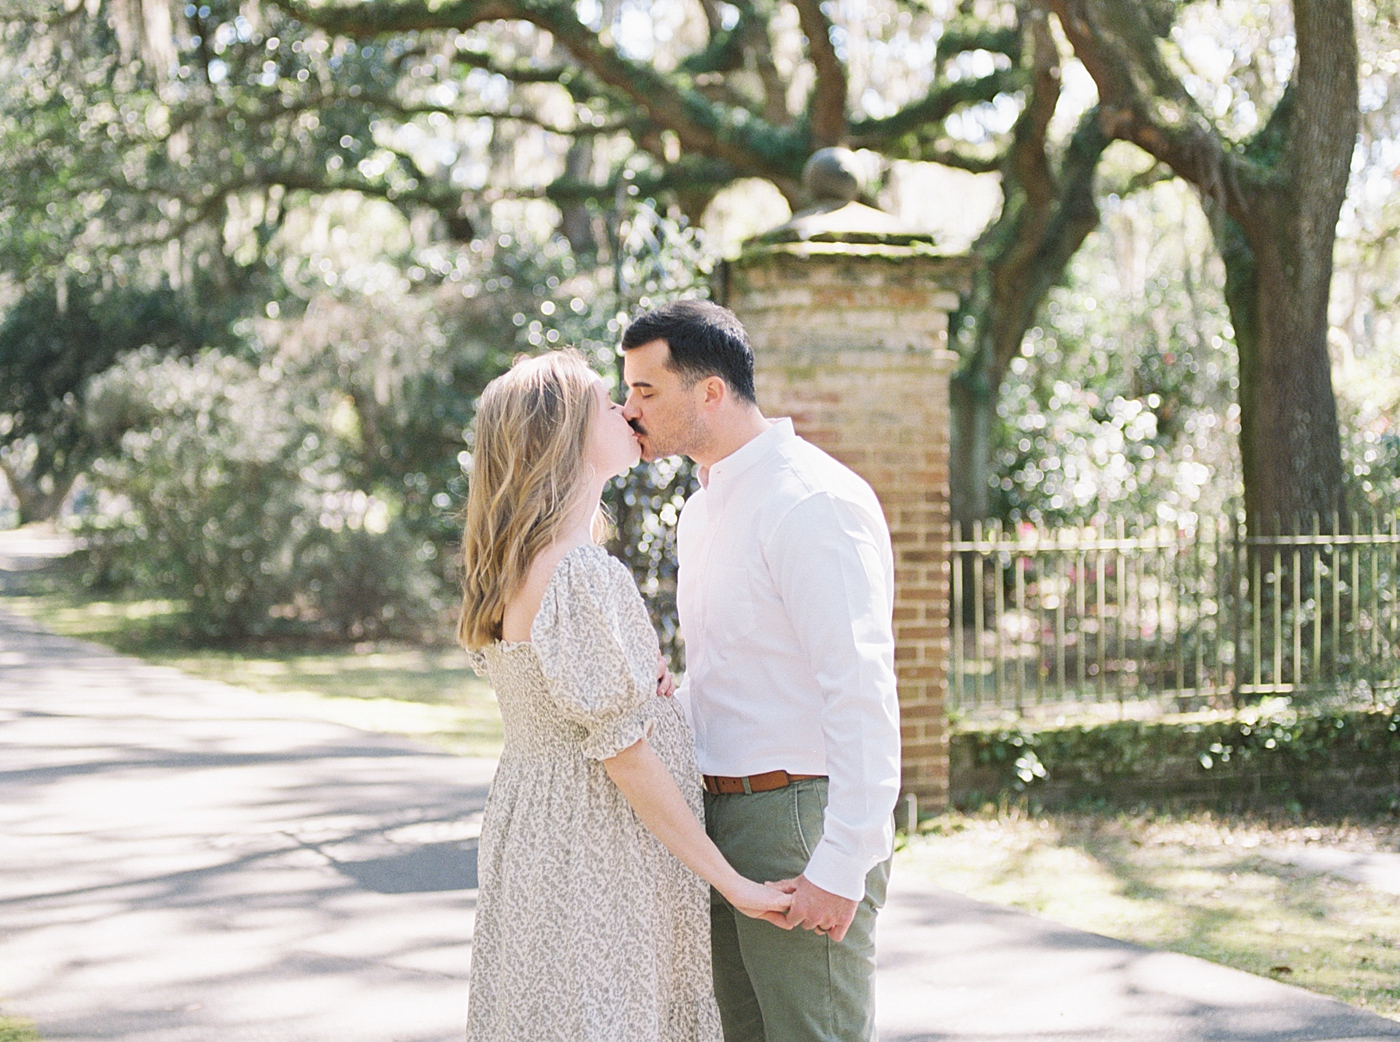 Husband and an expecting wife in a spring dress kissing and holding hands on an oak tree-lined walkway | Image by Caitlyn Motycka Photography